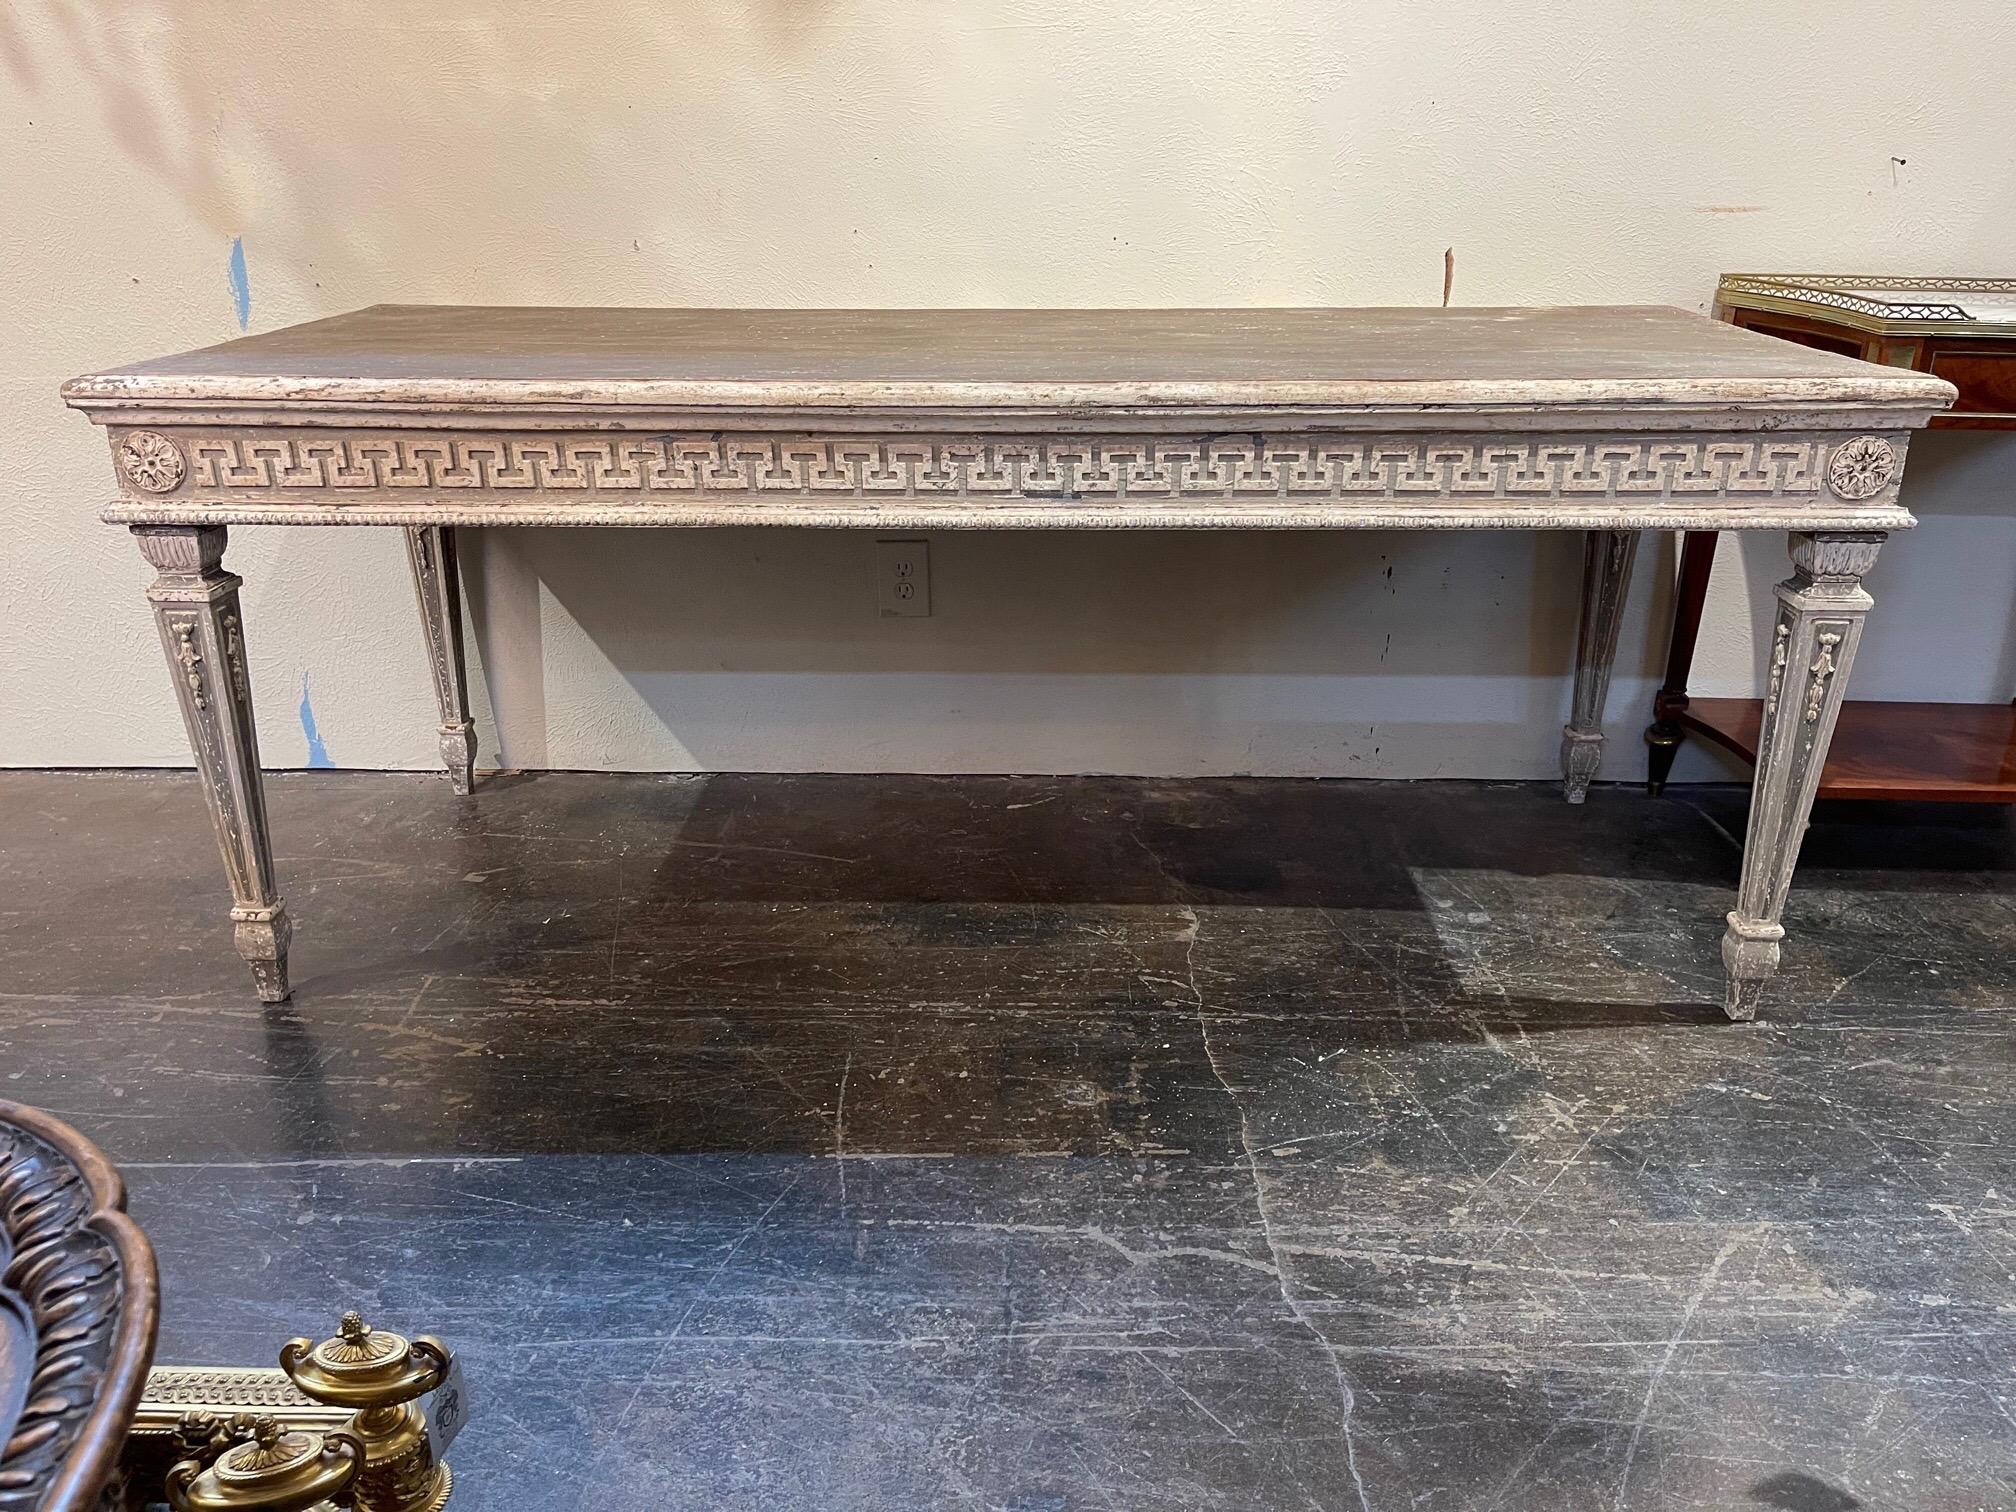 Very fine French carved dining tables with a Greek key design. The top is painted in a chalky grey. Creates a unique look! Note: There are 2 available. Price listed is for 1